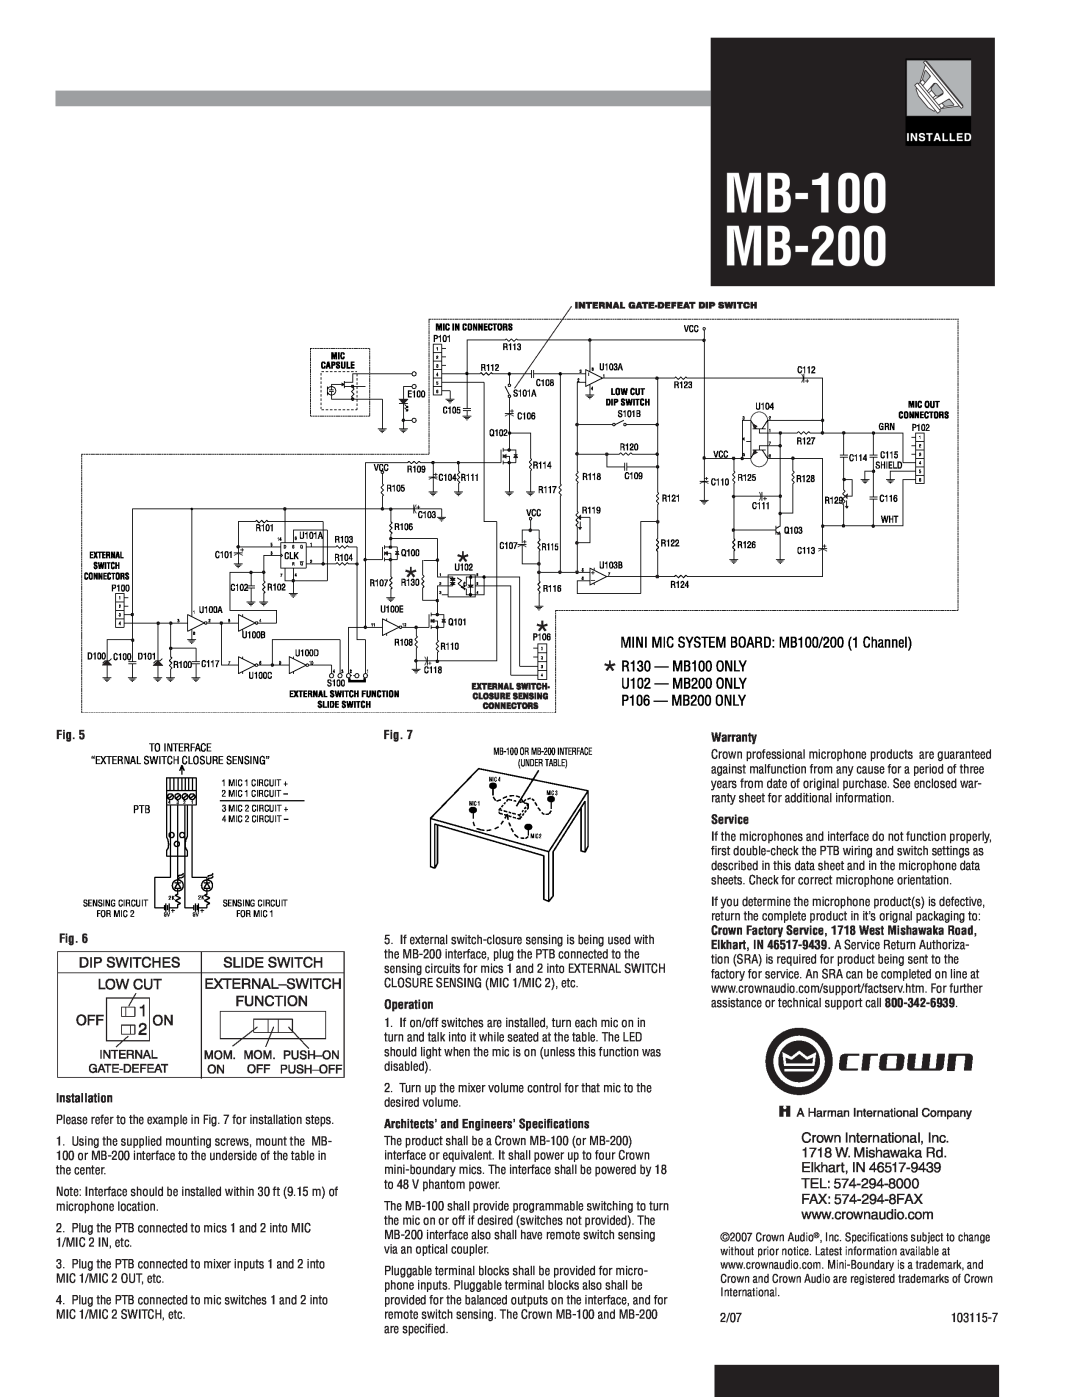 Crown Audio MB-100 MB-200, Installation, Operation, Architects’ and Engineers’ Speciﬁcations, Warranty, Service 